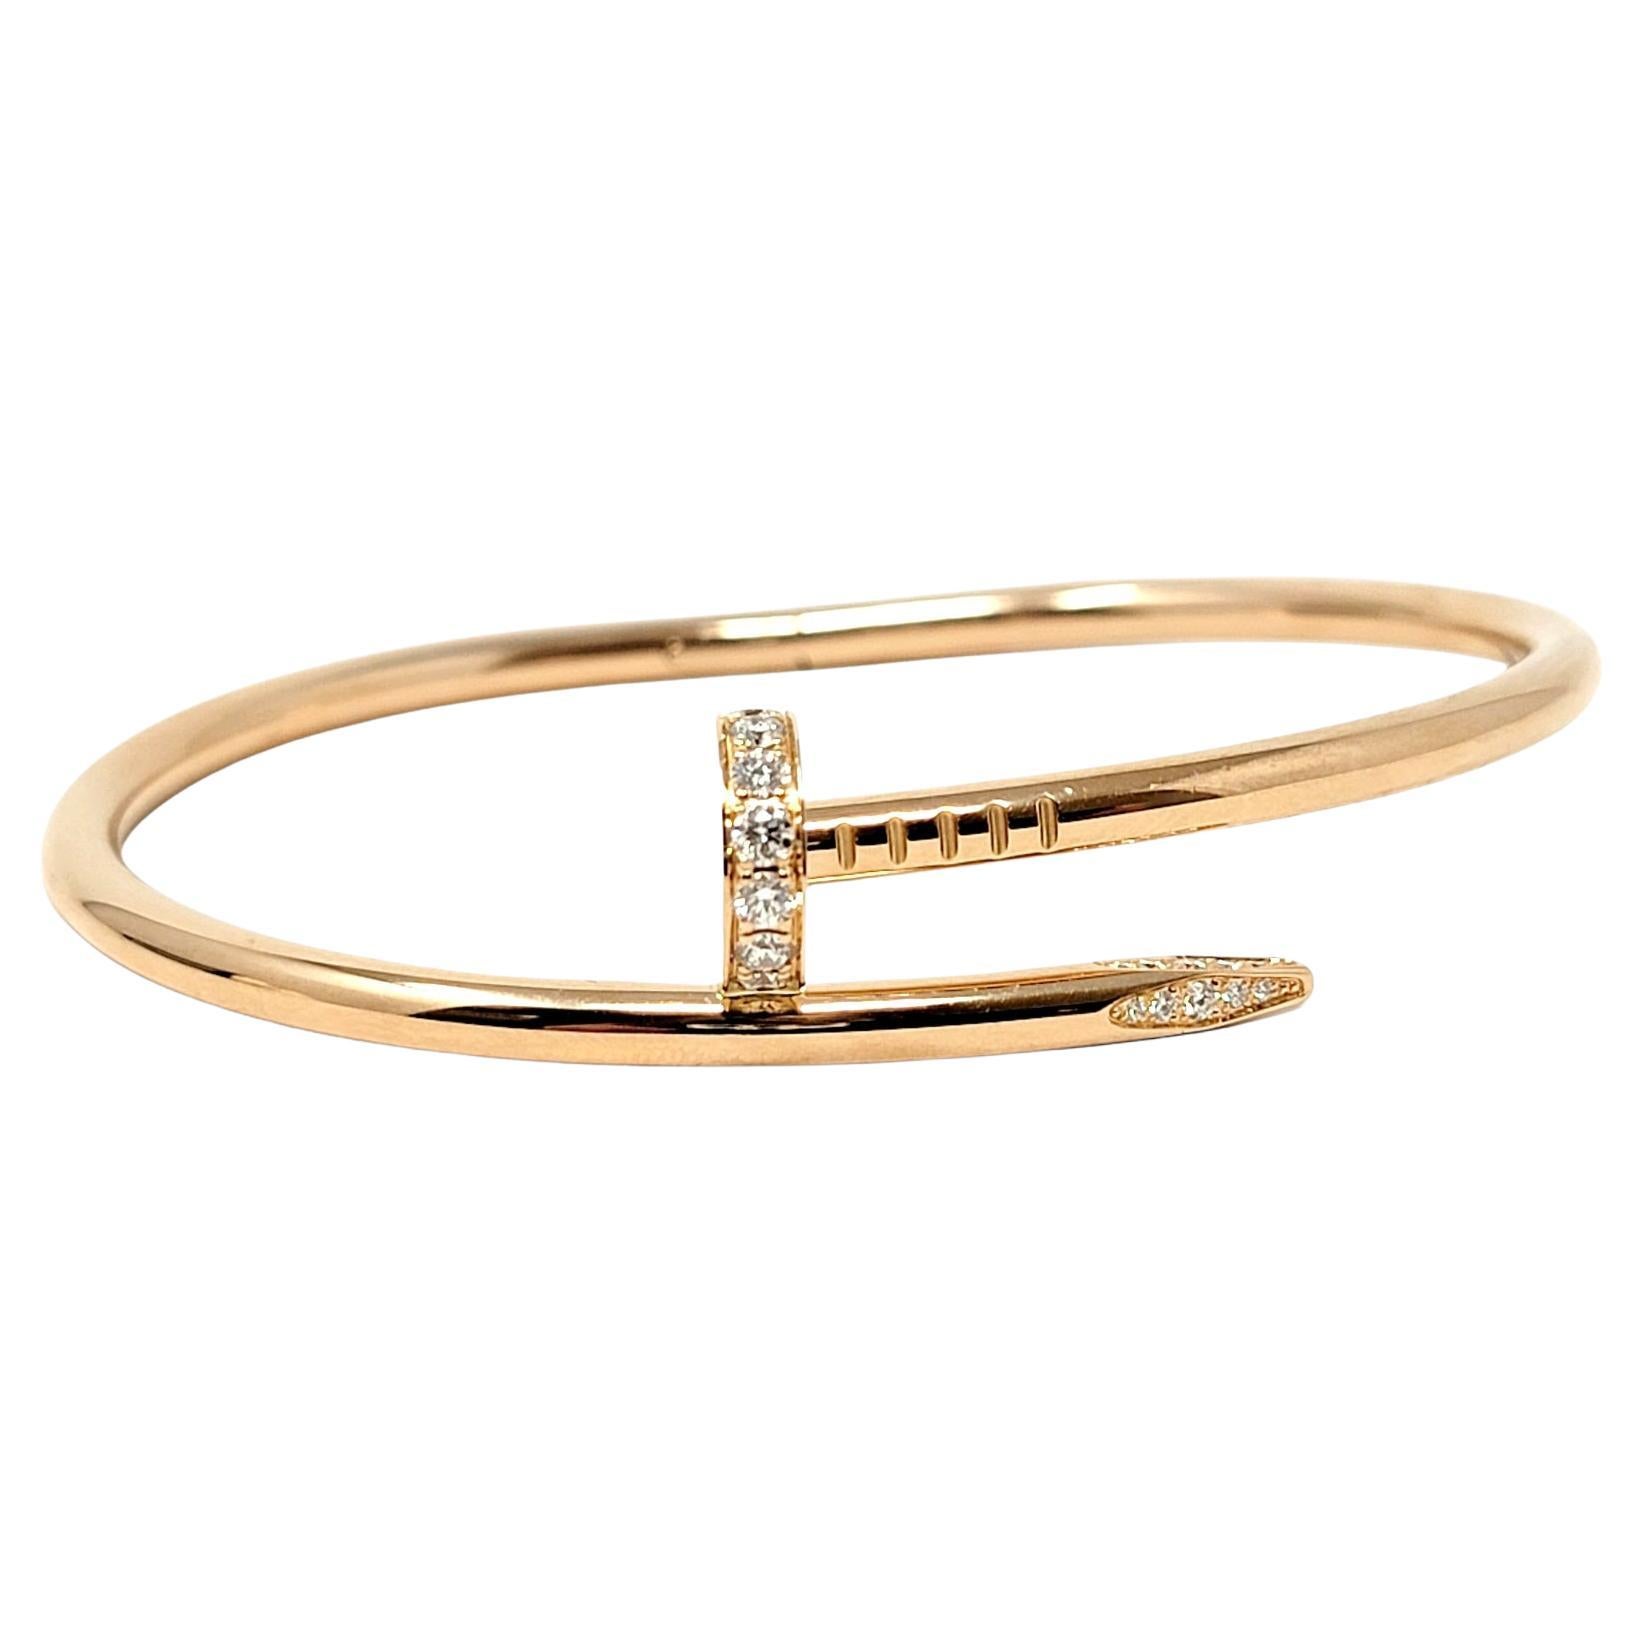 Iconic Juste un Clou hinged bangle bracelet from luxury jeweler, Cartier, is simply stunning. This timeless 18 karat rose gold piece makes a chic statement on the wrist. With its clean lines, sparkling diamond accents, and flawless elegance, this